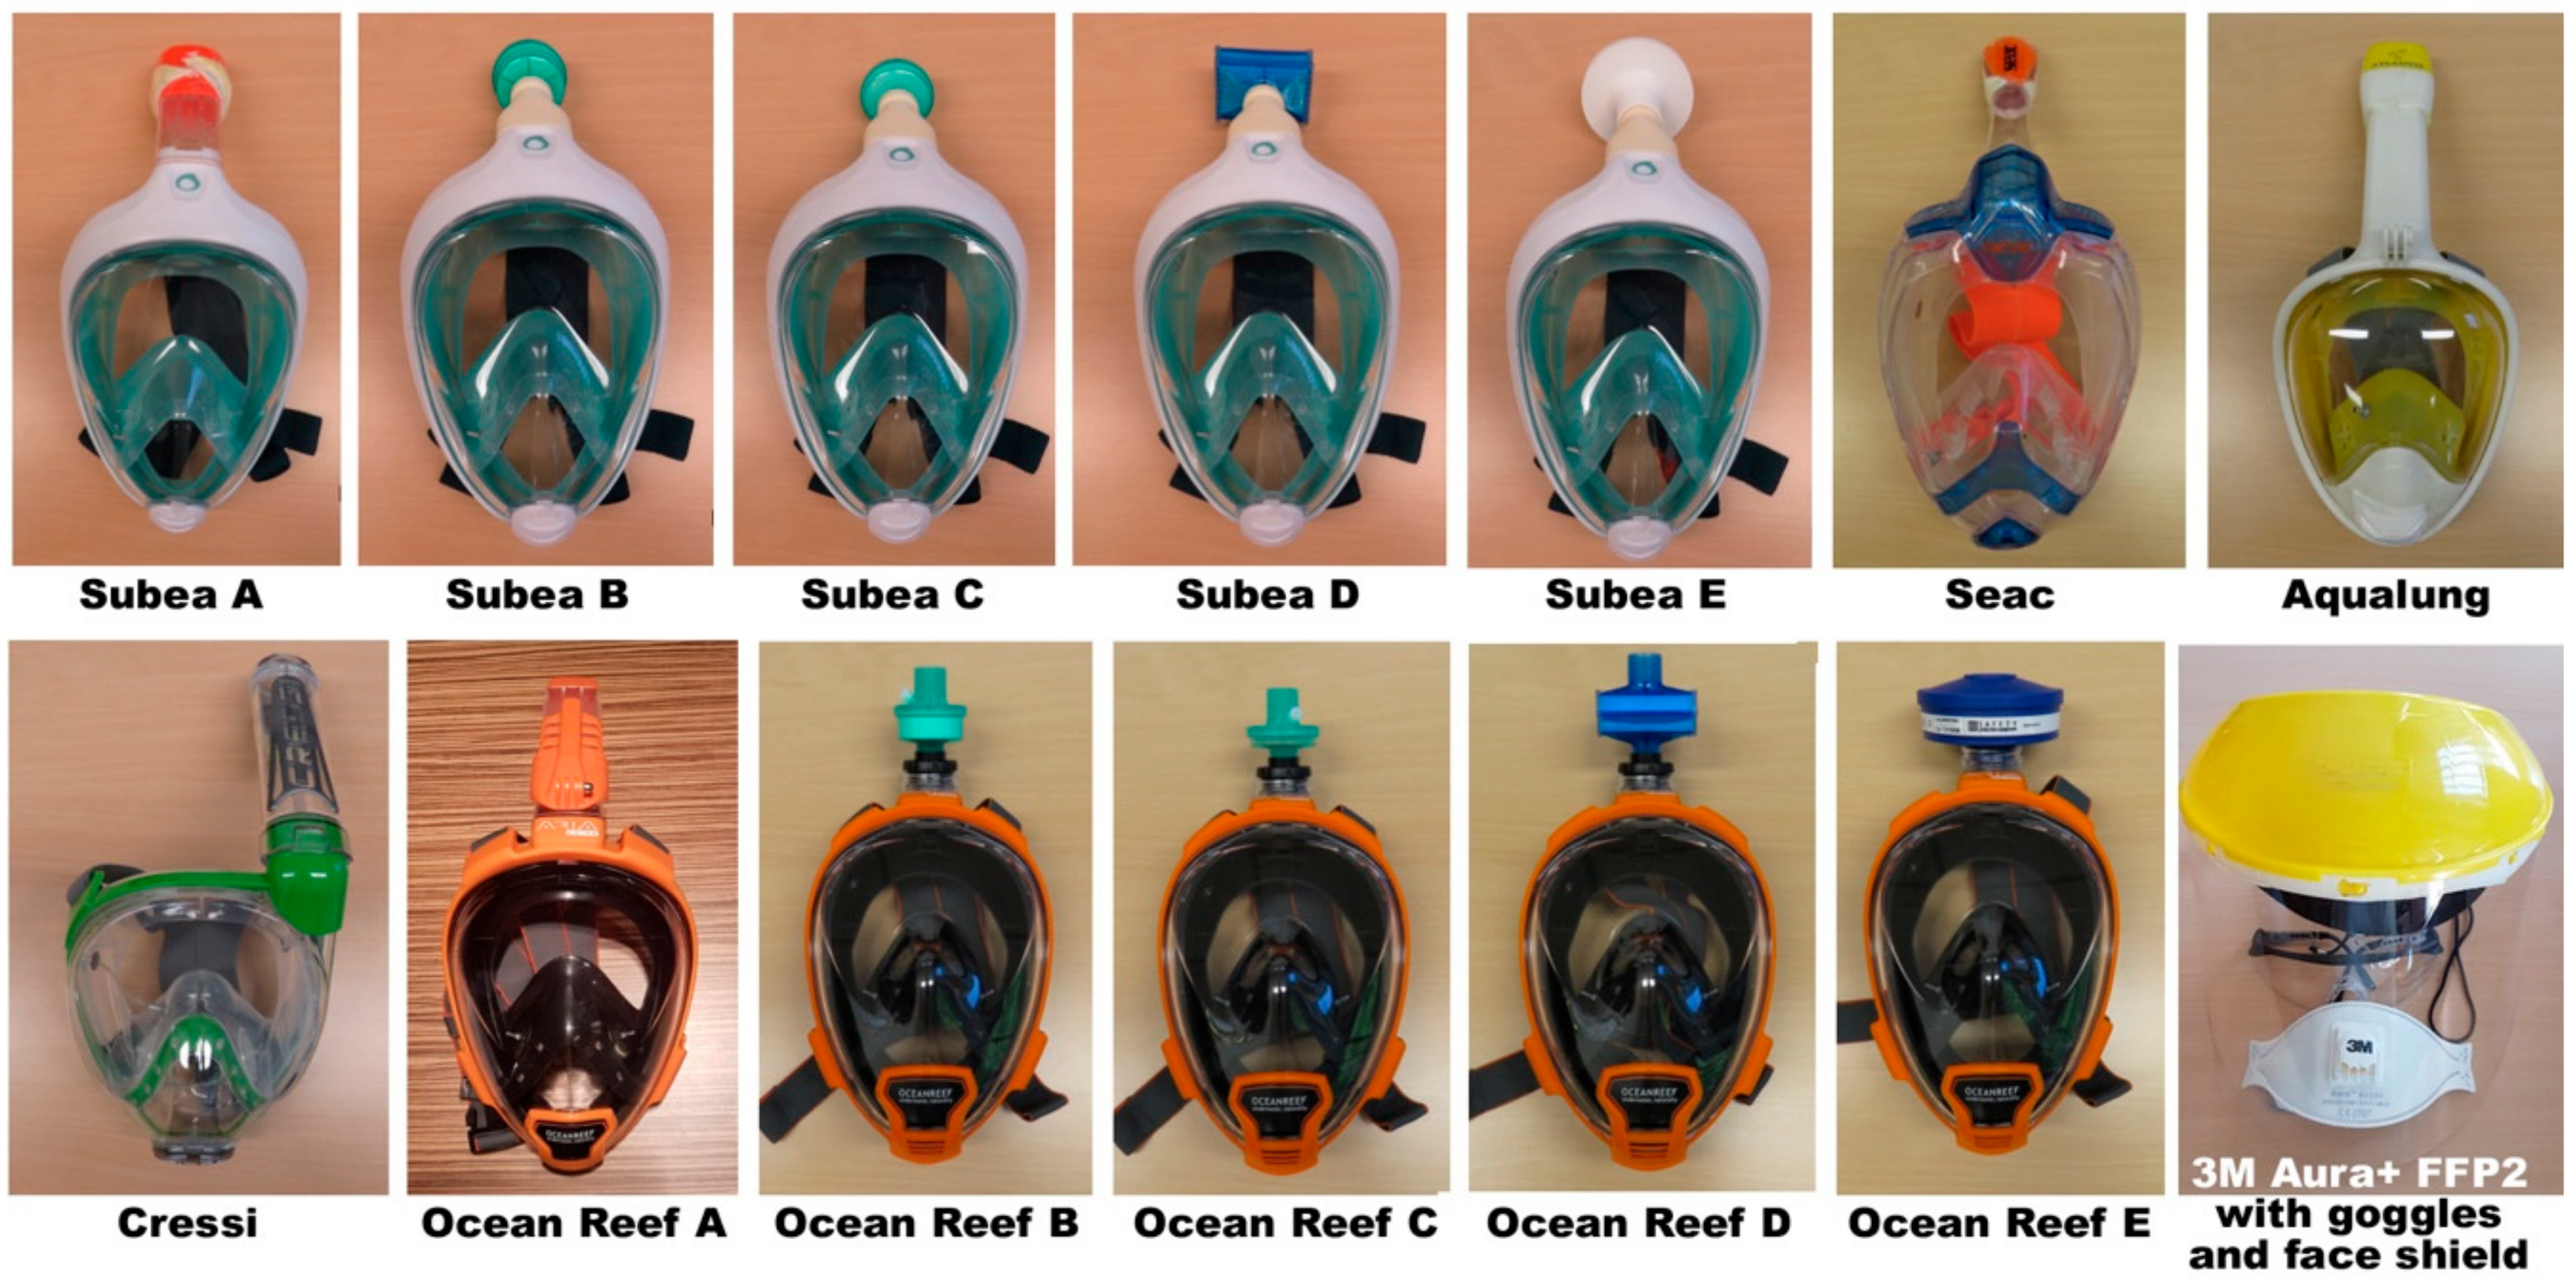 Hoved skærm kapre IJERPH | Free Full-Text | Evaluation of Protection Level, Respiratory  Safety, and Practical Aspects of Commercially Available Snorkel Masks as  Personal Protection Devices Against Aerosolized Contaminants and SARS-CoV2